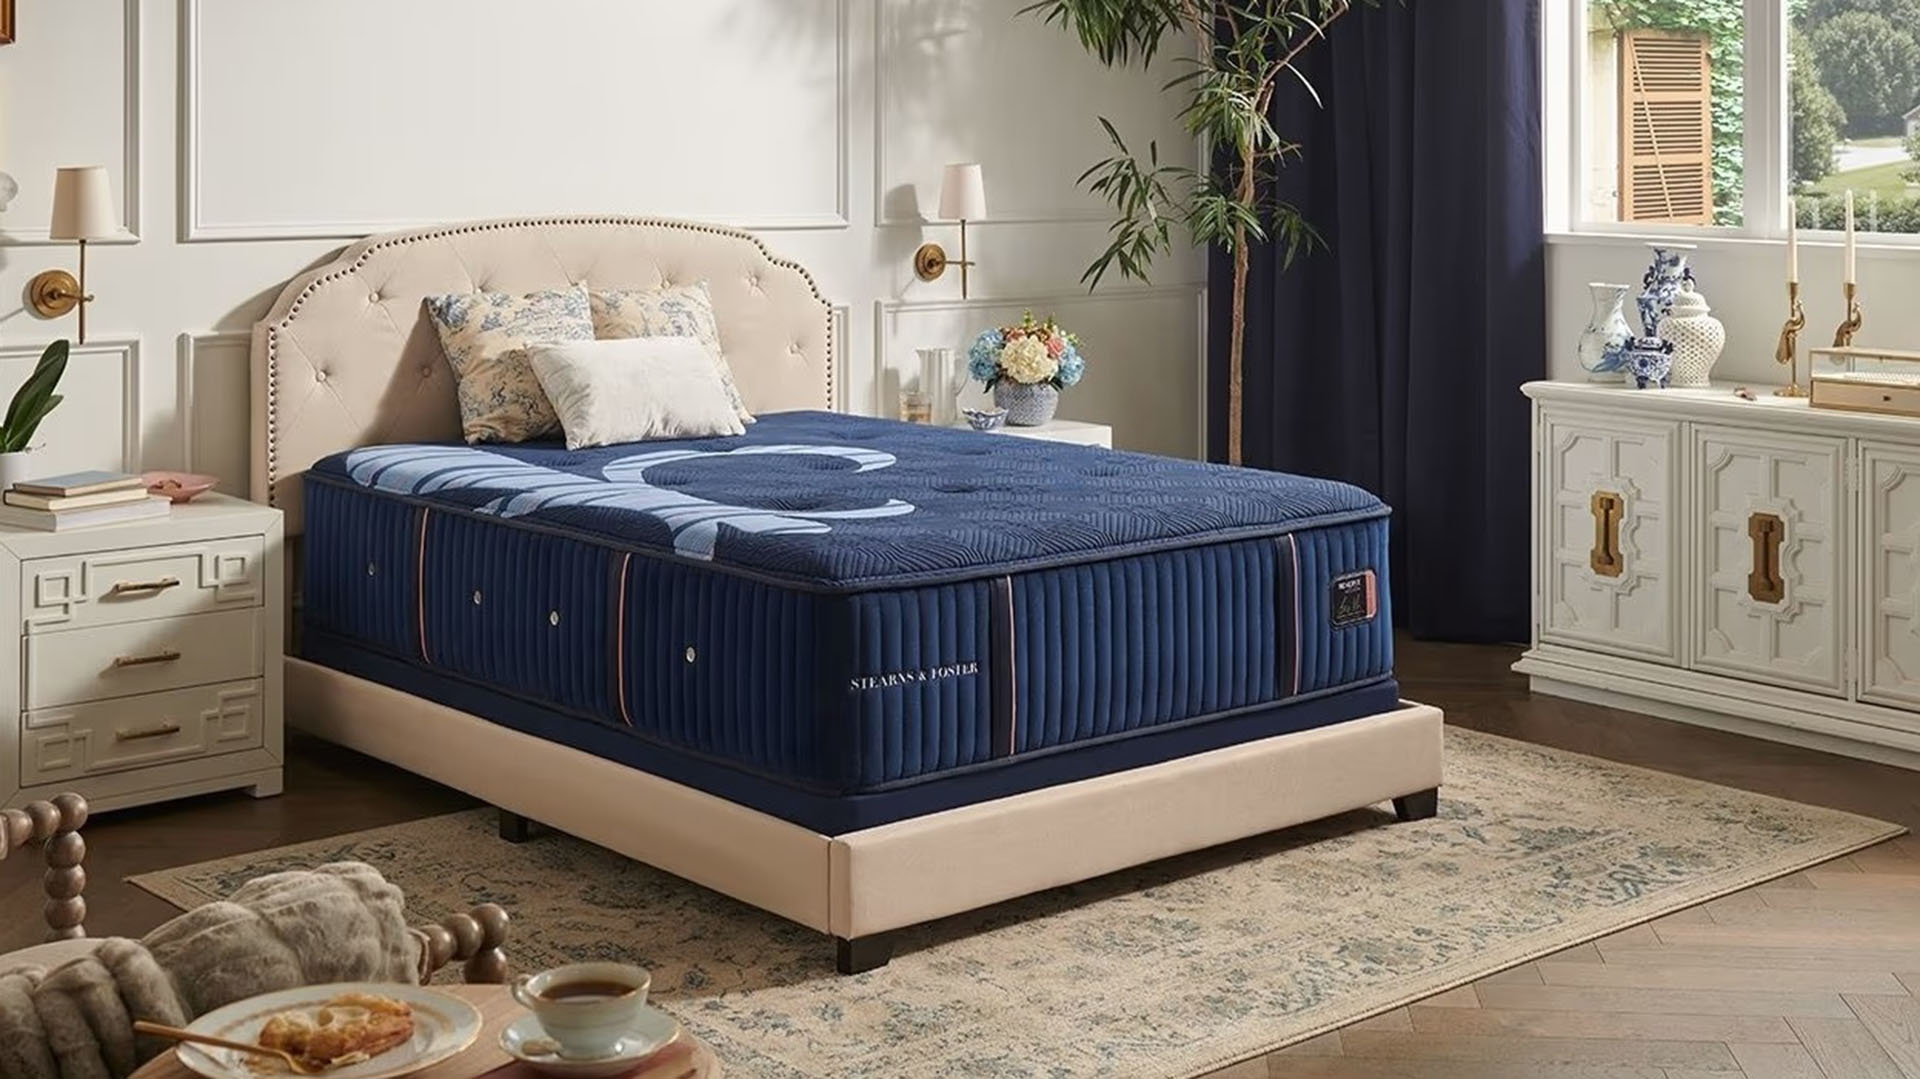 Stearns & Foster mattresses in Cupertino are designed with comfort and support in mind.